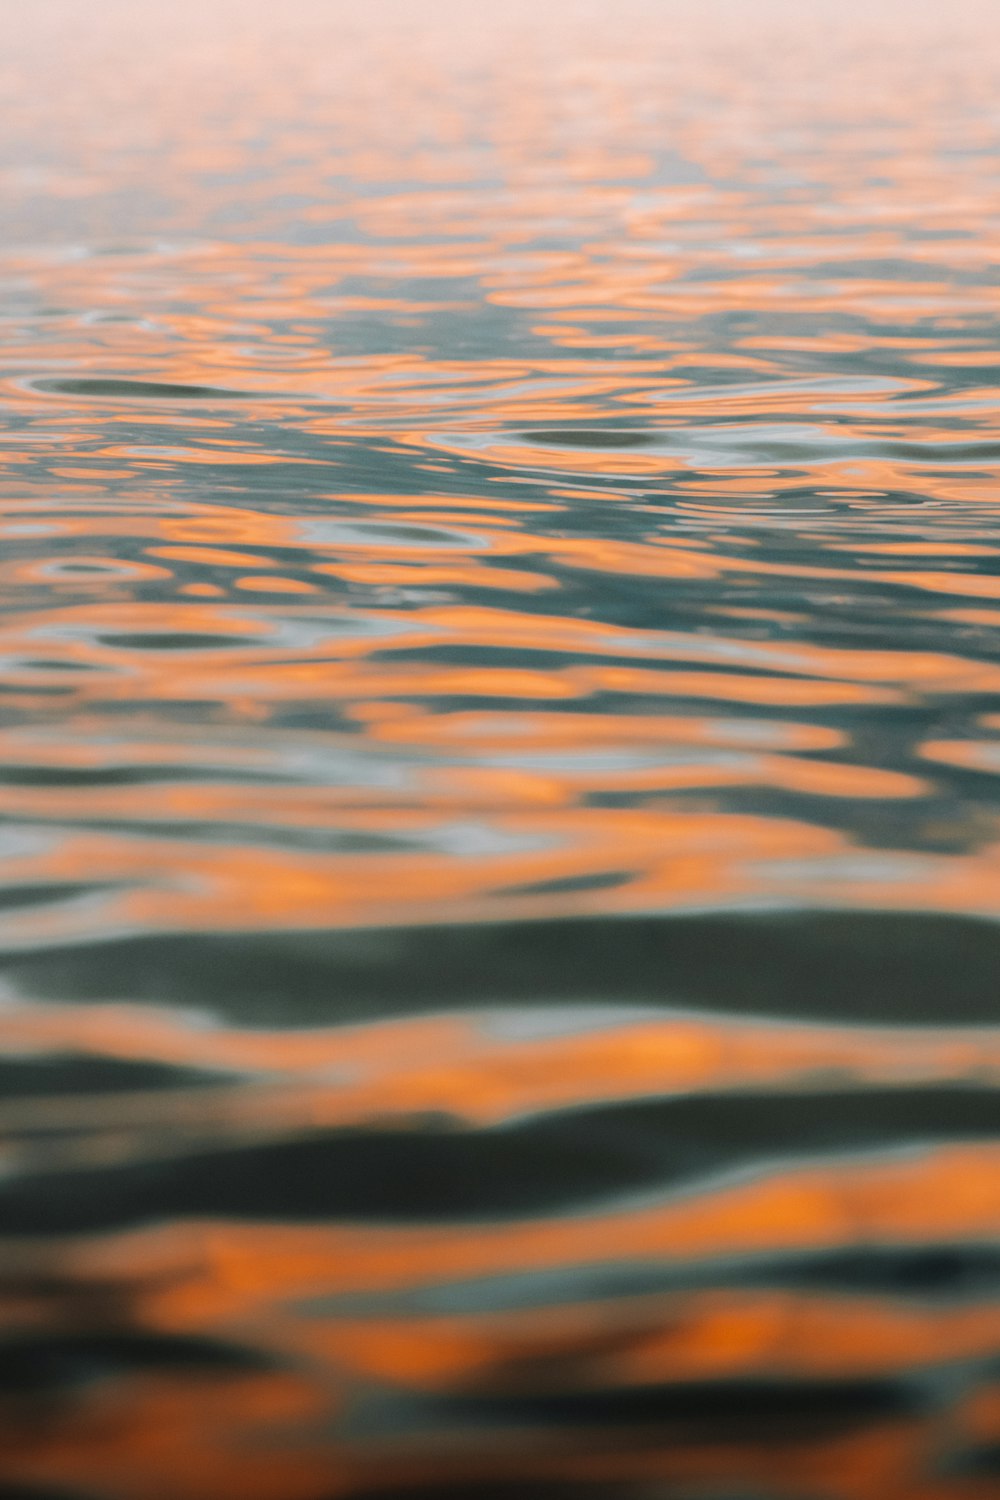 close up photo of water